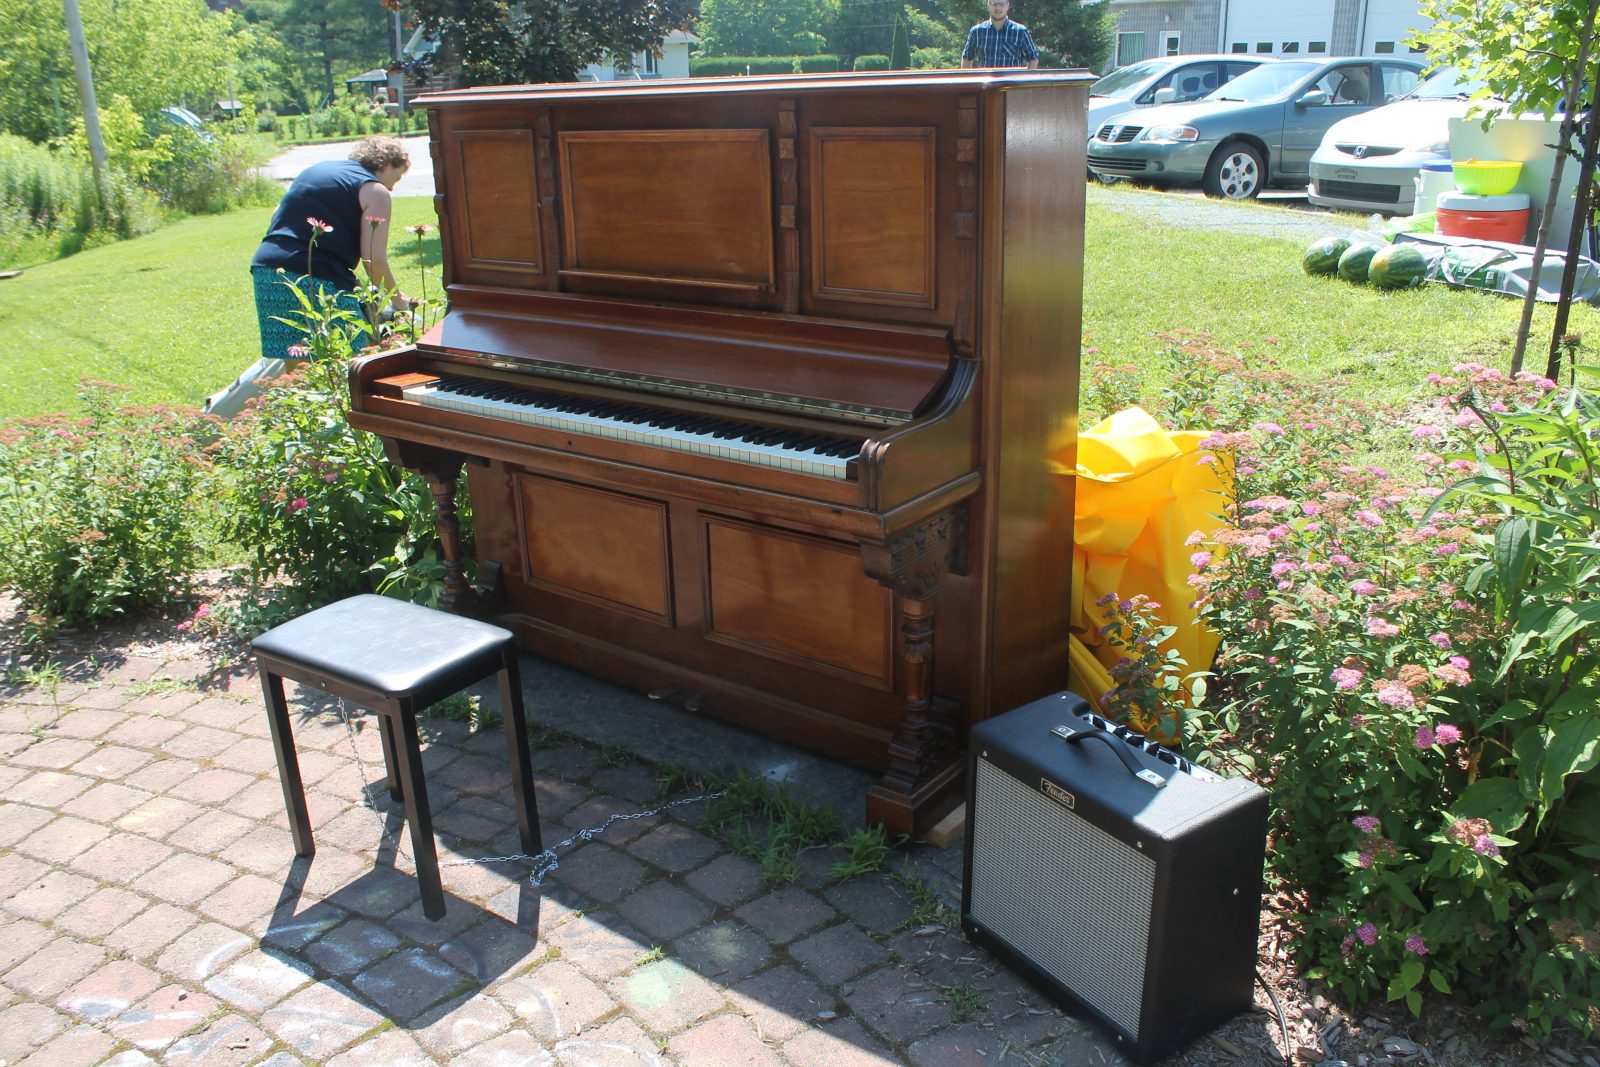 Waterville piano bringing music out into the open